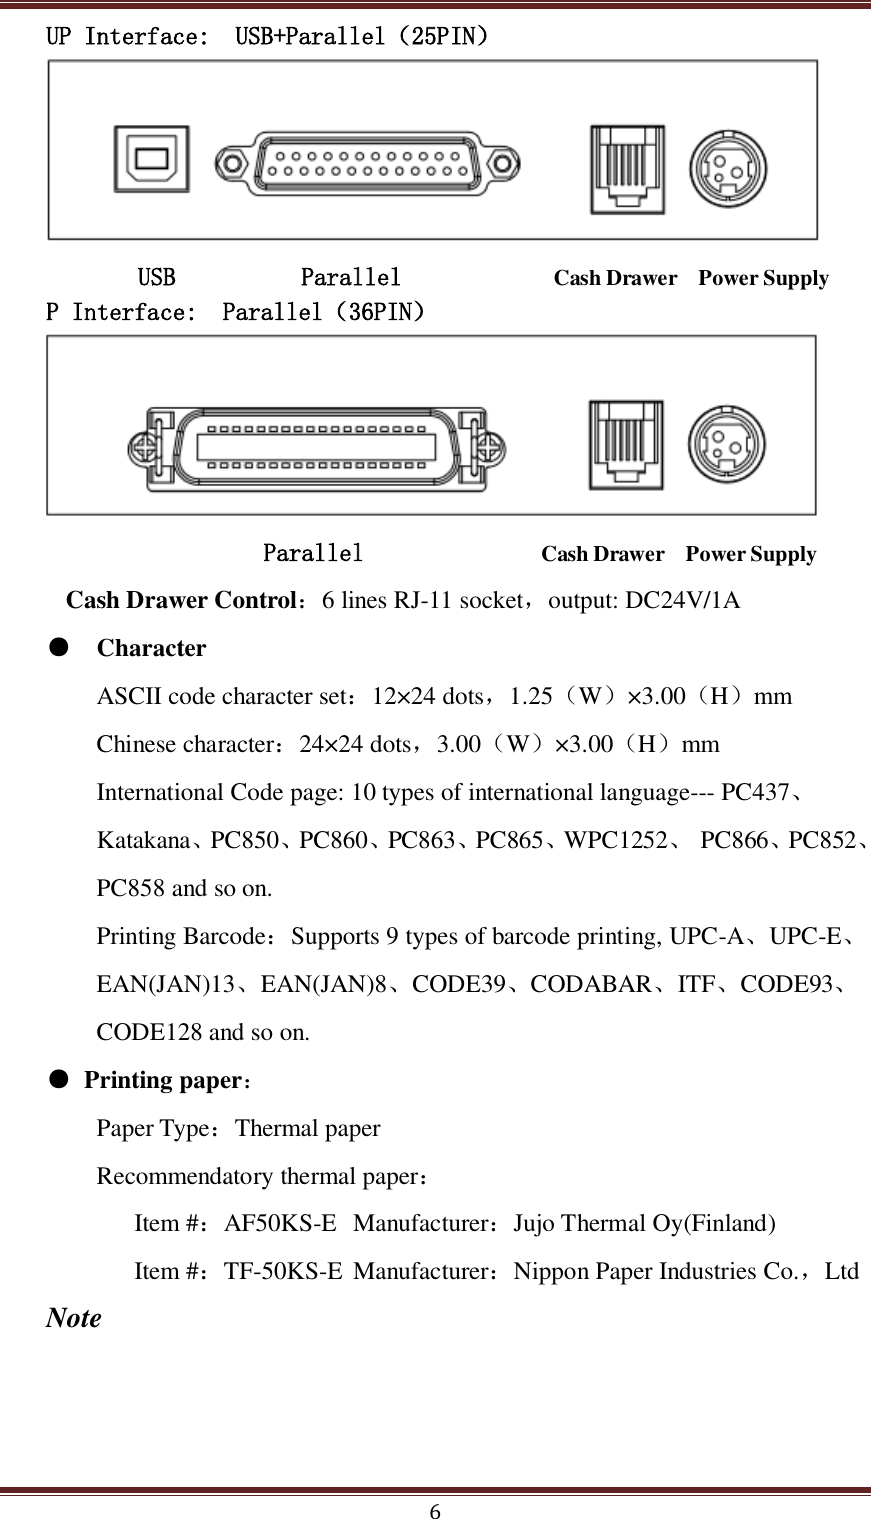  6 UP Interface:  USB+Parallel（25PIN）  USB          Parallel            Cash Drawer    Power Supply P Interface:  Parallel（36PIN）           Parallel              Cash Drawer    Power Supply       Cash Drawer Control：6 lines RJ-11 socket，output: DC24V/1A ●   Character ASCII code character set：12×24 dots，1.25（W）×3.00（H）mm Chinese character：24×24 dots，3.00（W）×3.00（H）mm International Code page: 10 types of international language--- PC437、Katakana、PC850、PC860、PC863、PC865、WPC1252、  PC866、PC852、PC858 and so on. Printing Barcode：Supports 9 types of barcode printing, UPC-A、UPC-E、EAN(JAN)13、EAN(JAN)8、CODE39、CODABAR、ITF、CODE93、CODE128 and so on. ● Printing paper： Paper Type：Thermal paper Recommendatory thermal paper： Item #：AF50KS-E  Manufacturer：Jujo Thermal Oy(Finland) Item #：TF-50KS-E  Manufacturer：Nippon Paper Industries Co.，Ltd  Note 